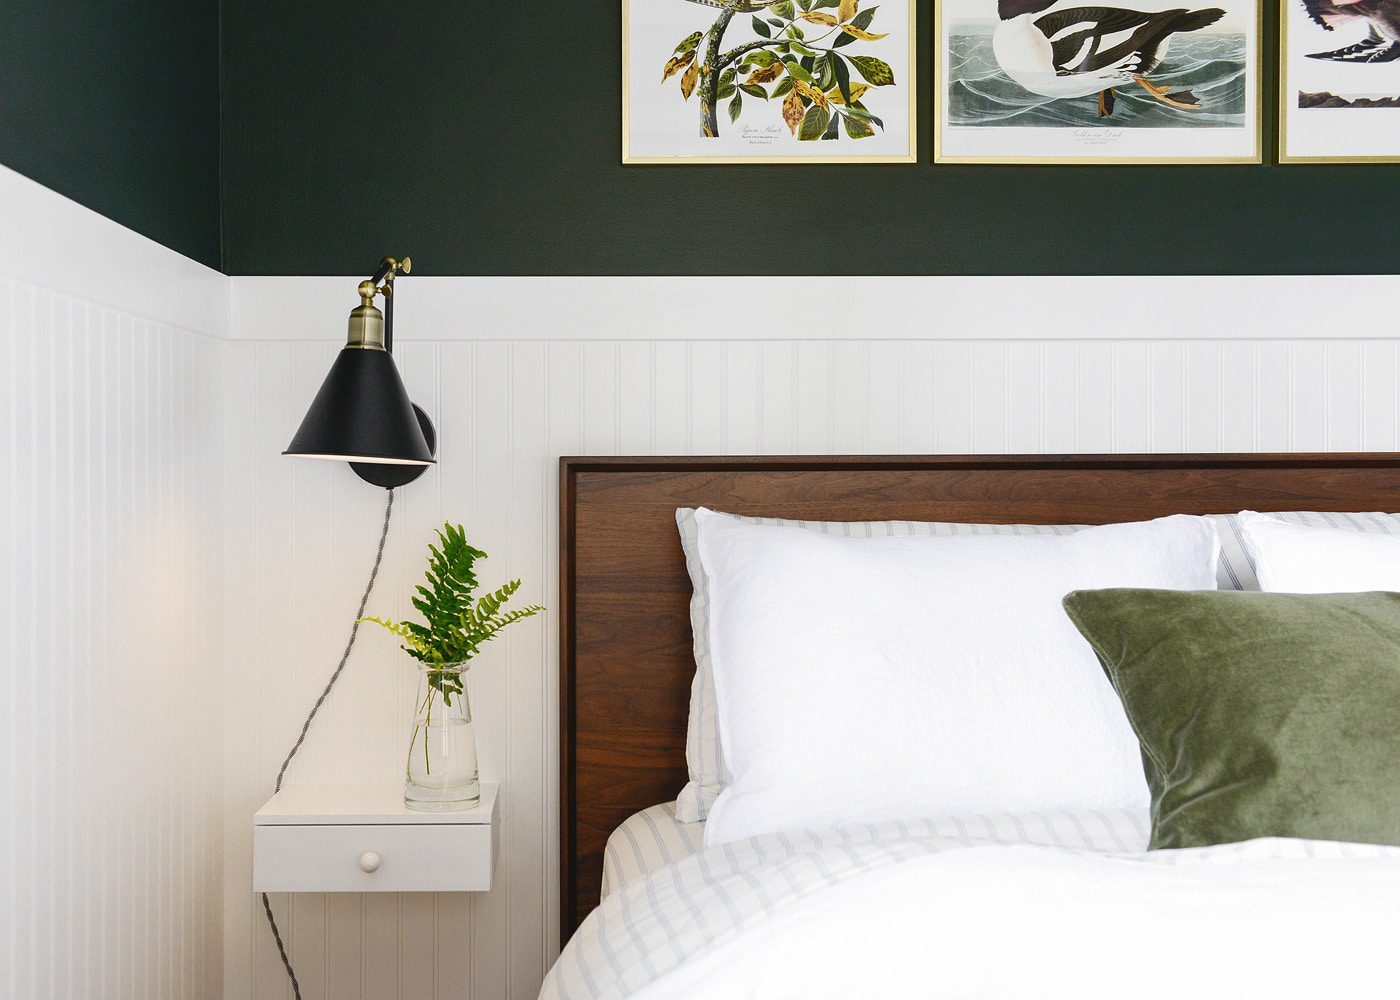 A walnut platform bed with white bedding, black bedside sconce and dark green walls above white beadboard | via Yellow Brick Home